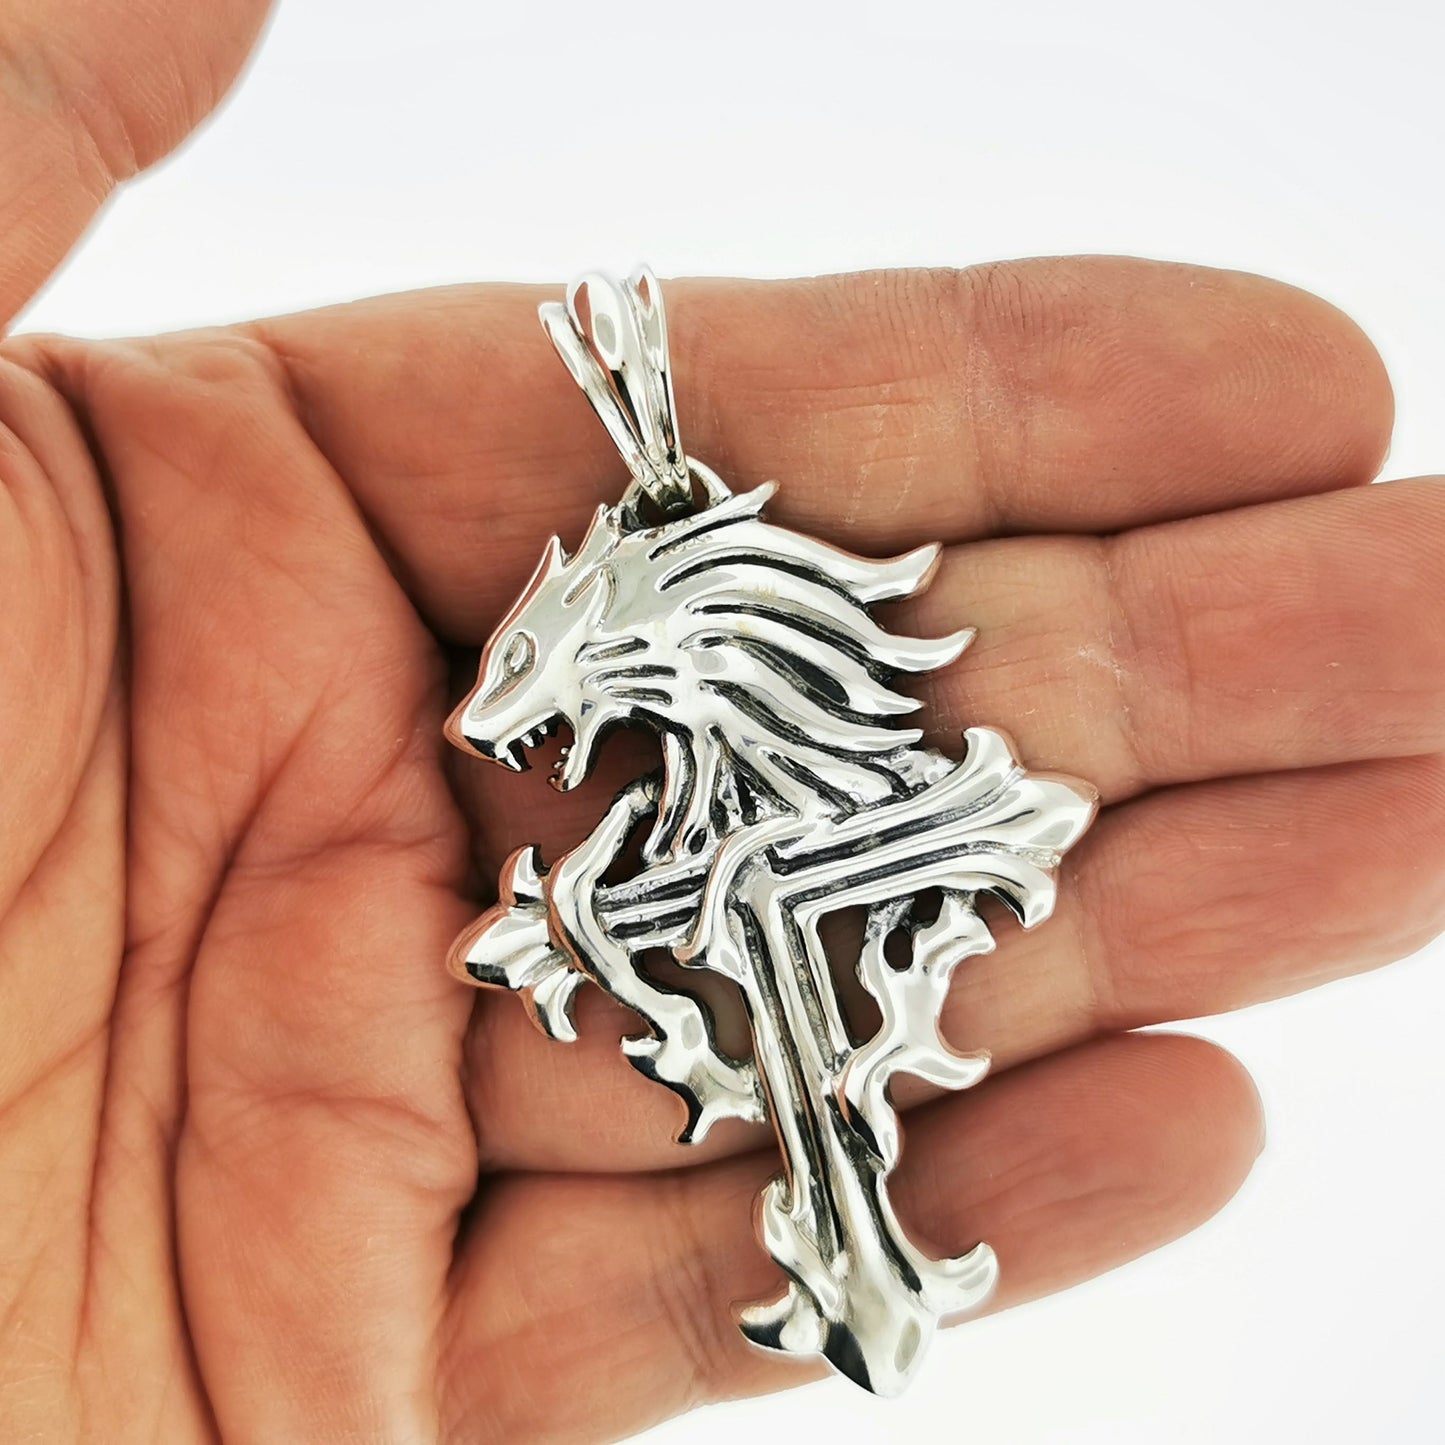 Final Fantasy 8 Squall Griever Pendant in Sterling Silver, FFVIII Cosplay Pendant, FFVIII Sleeping Lion Pendant, FFVIII Pendant, Final Fantasy 8 Sleeping Lion Pendant